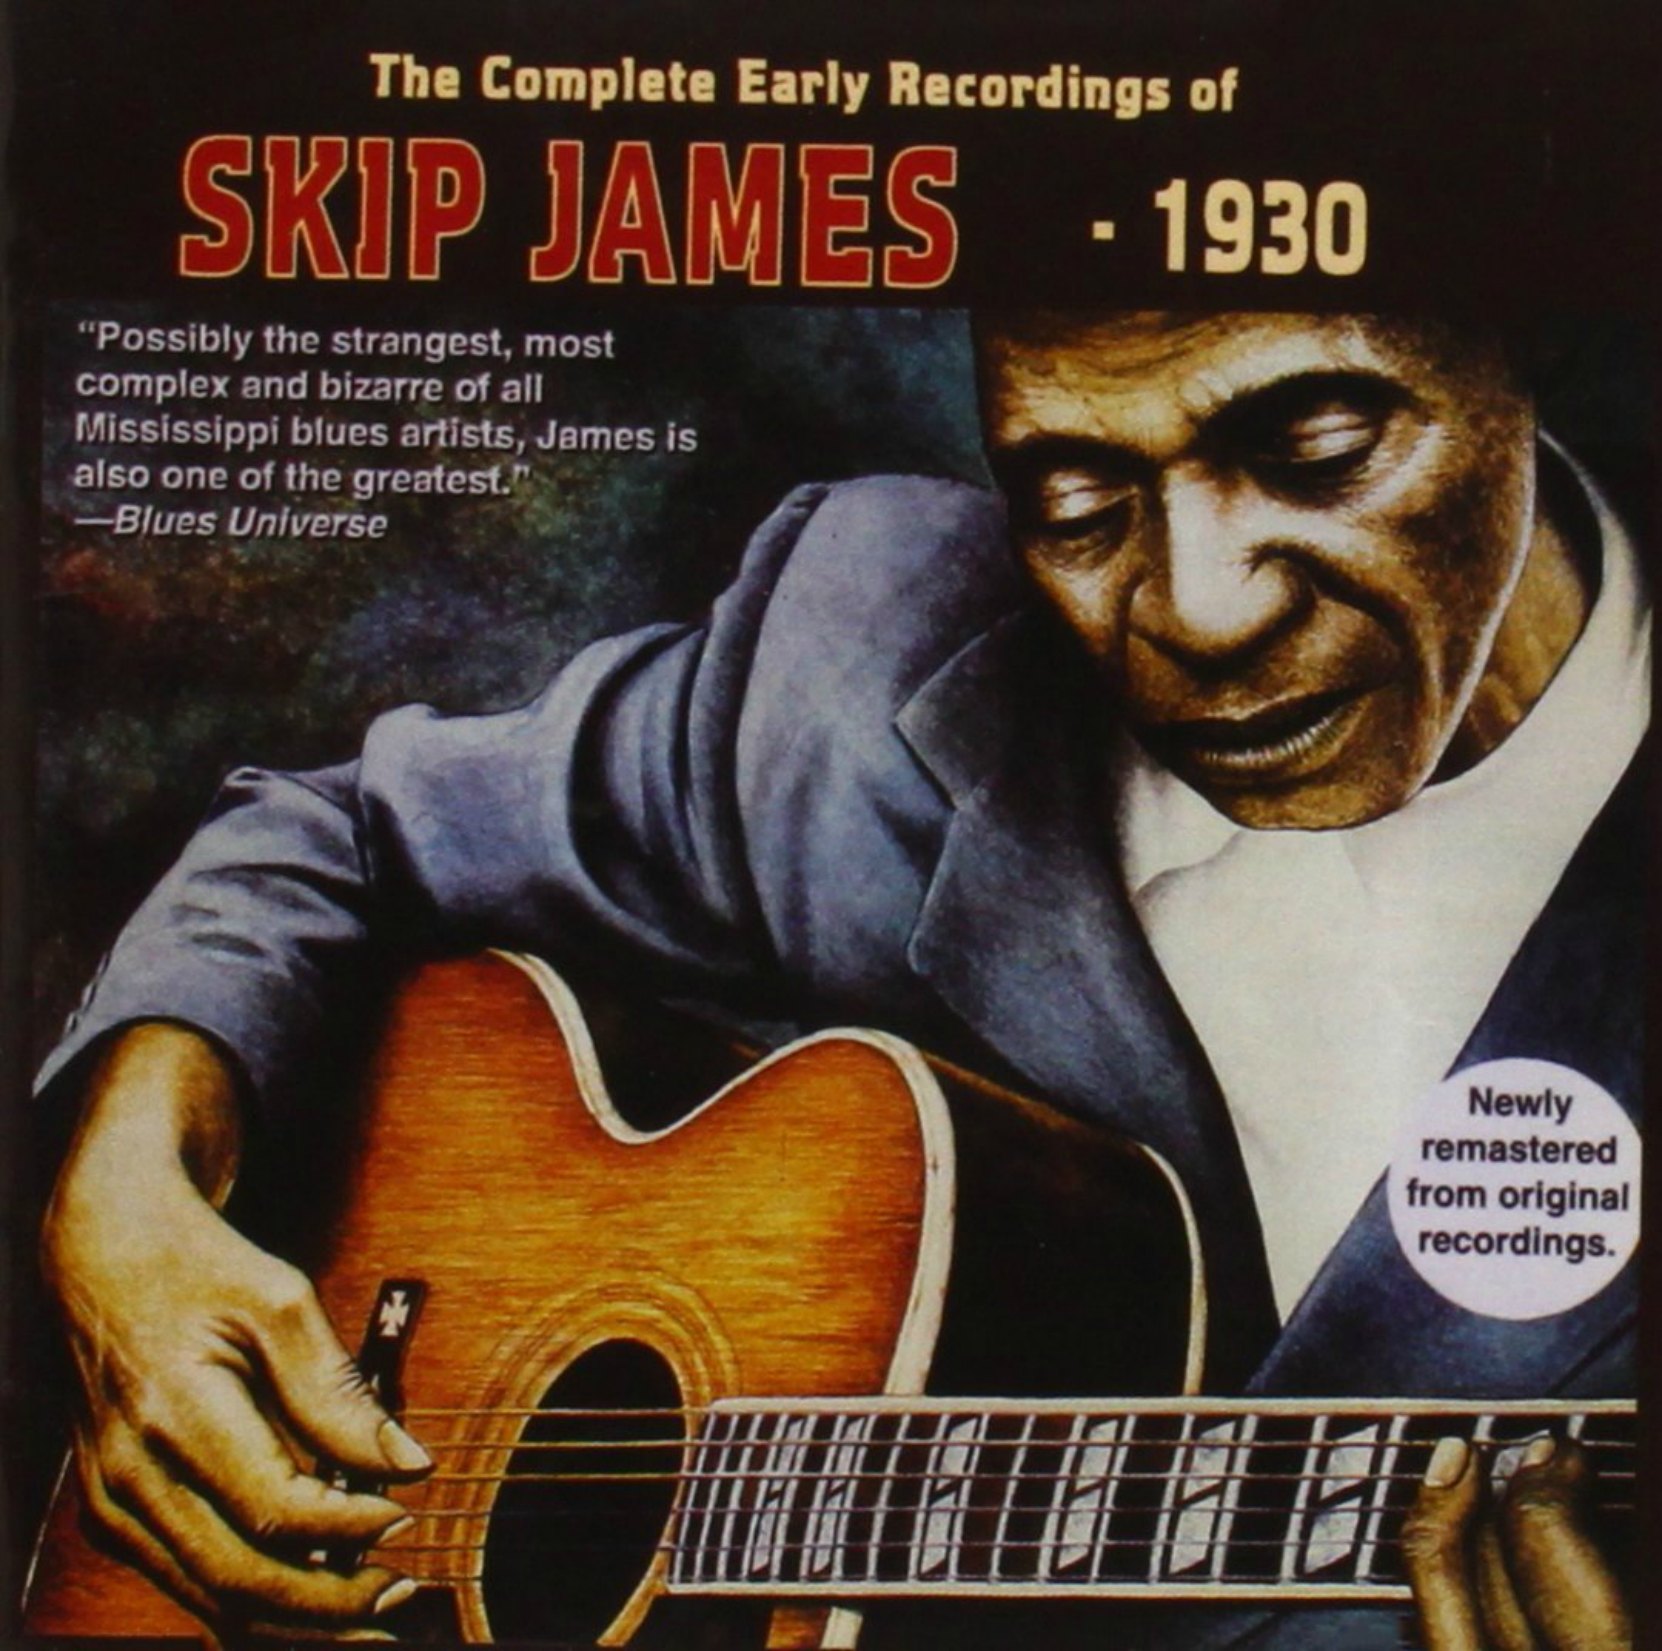 CD cover, The Complete Early Recordings of Skip James - 1930, by Skip James, released on Yazoo Records